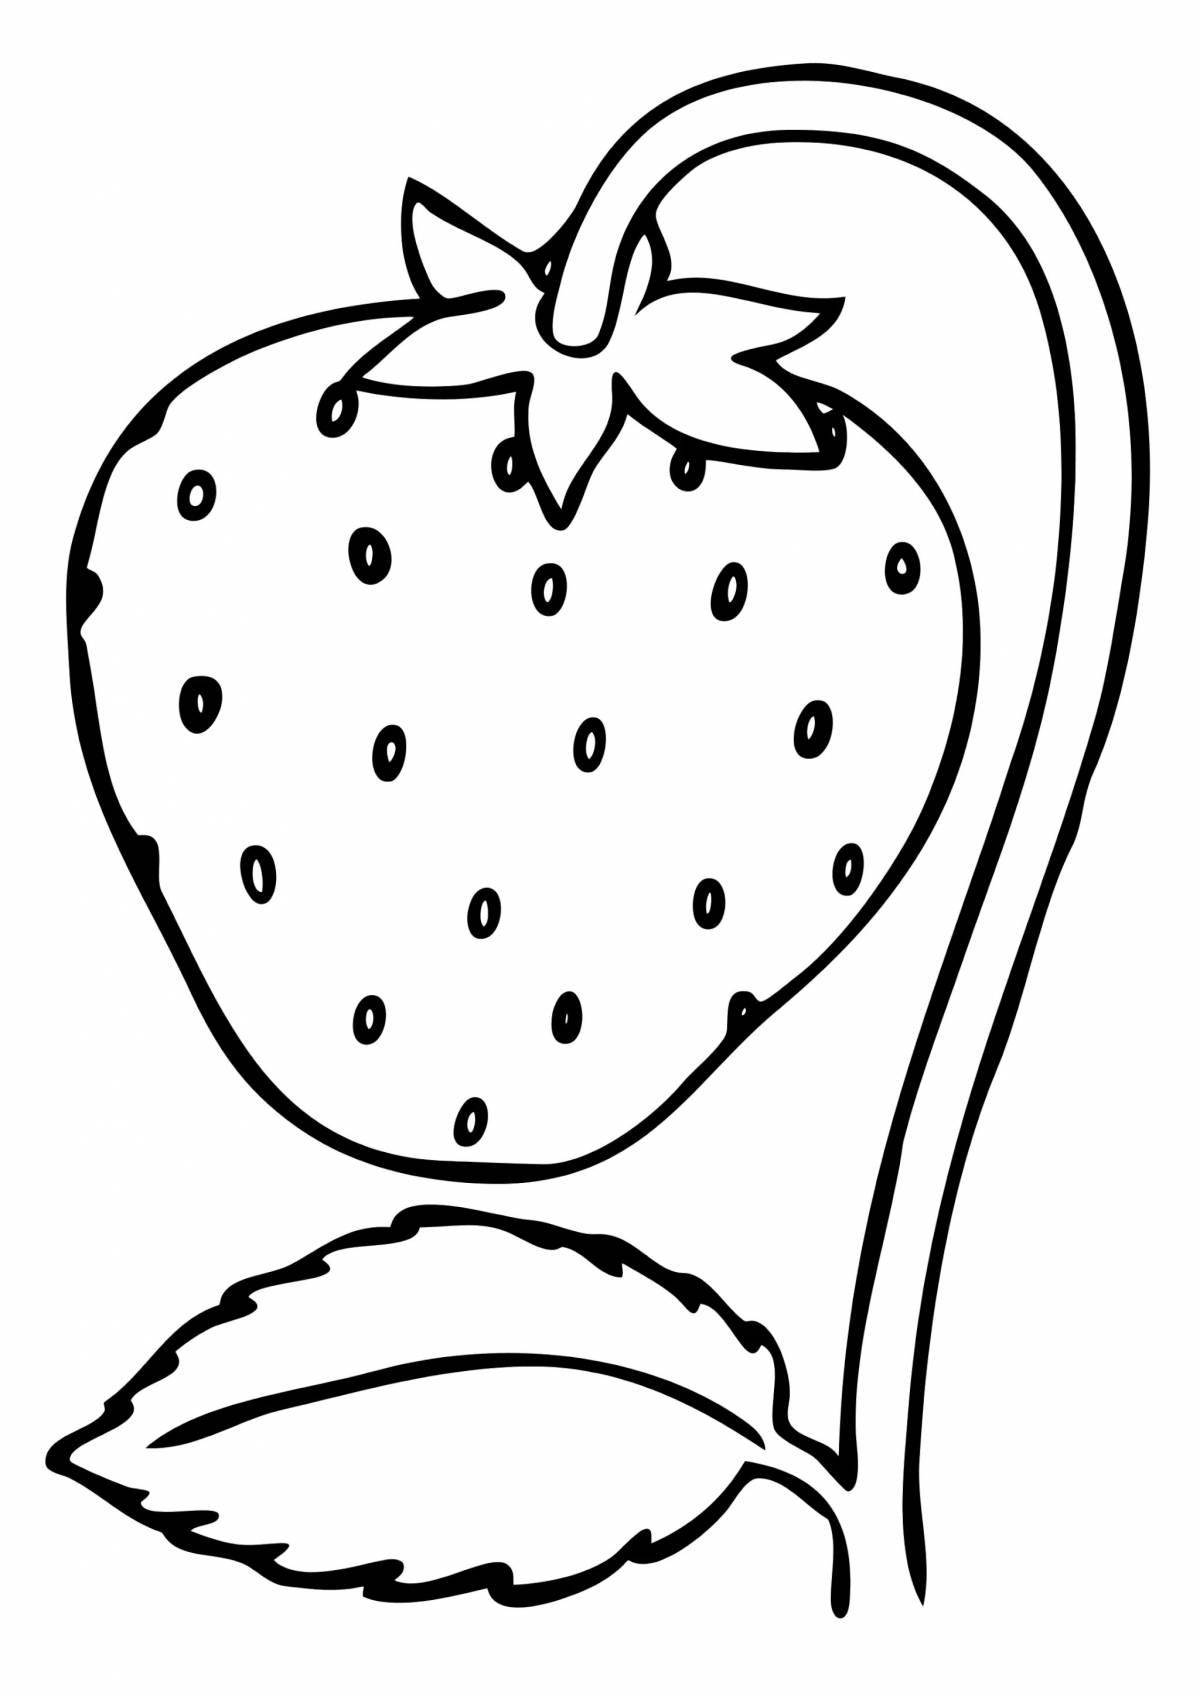 Unique strawberry coloring book for kids 5-6 years old